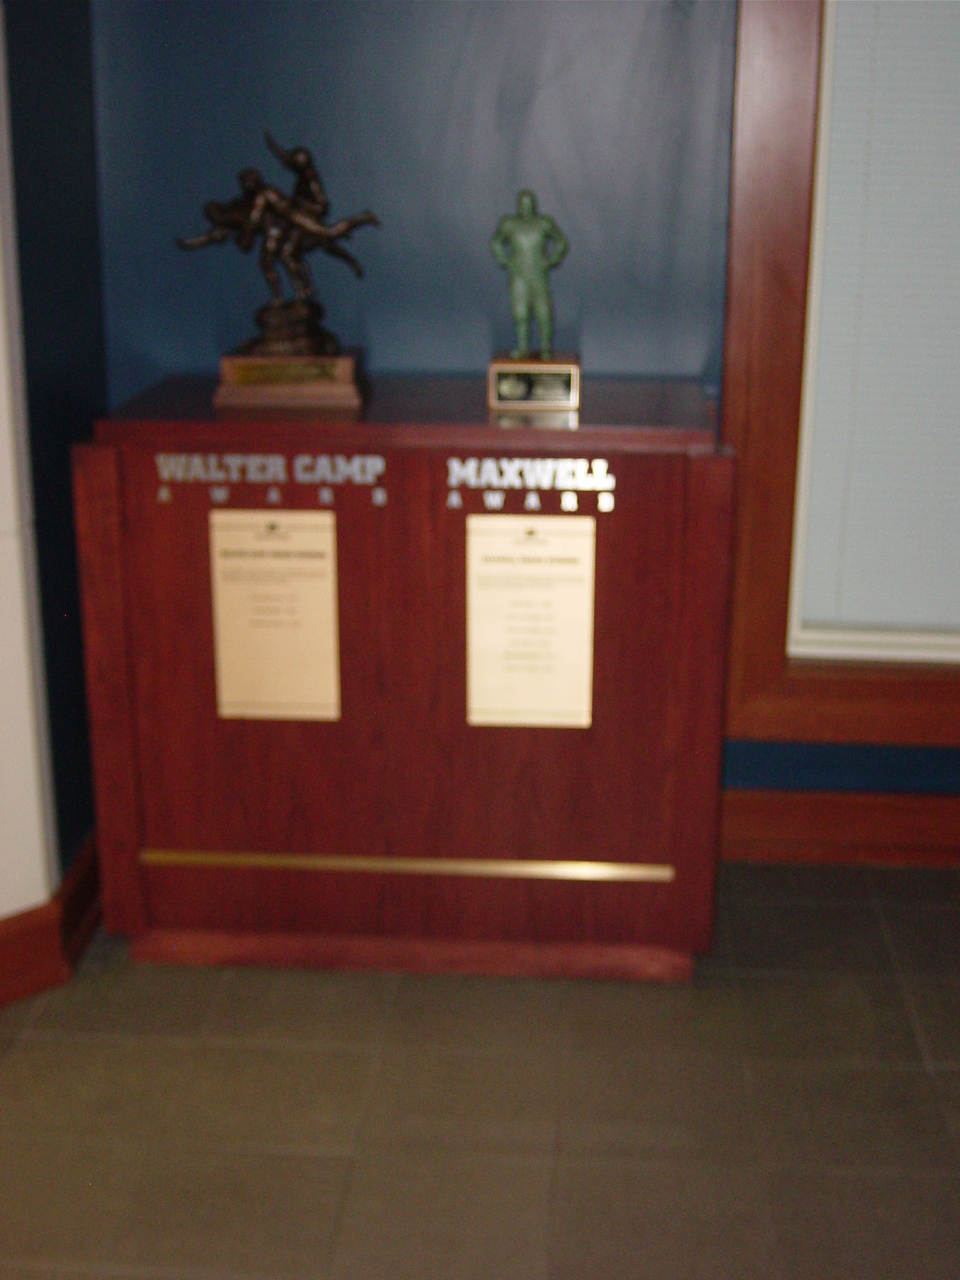 Walter Camp and Maxwell Trophies Notre Dame